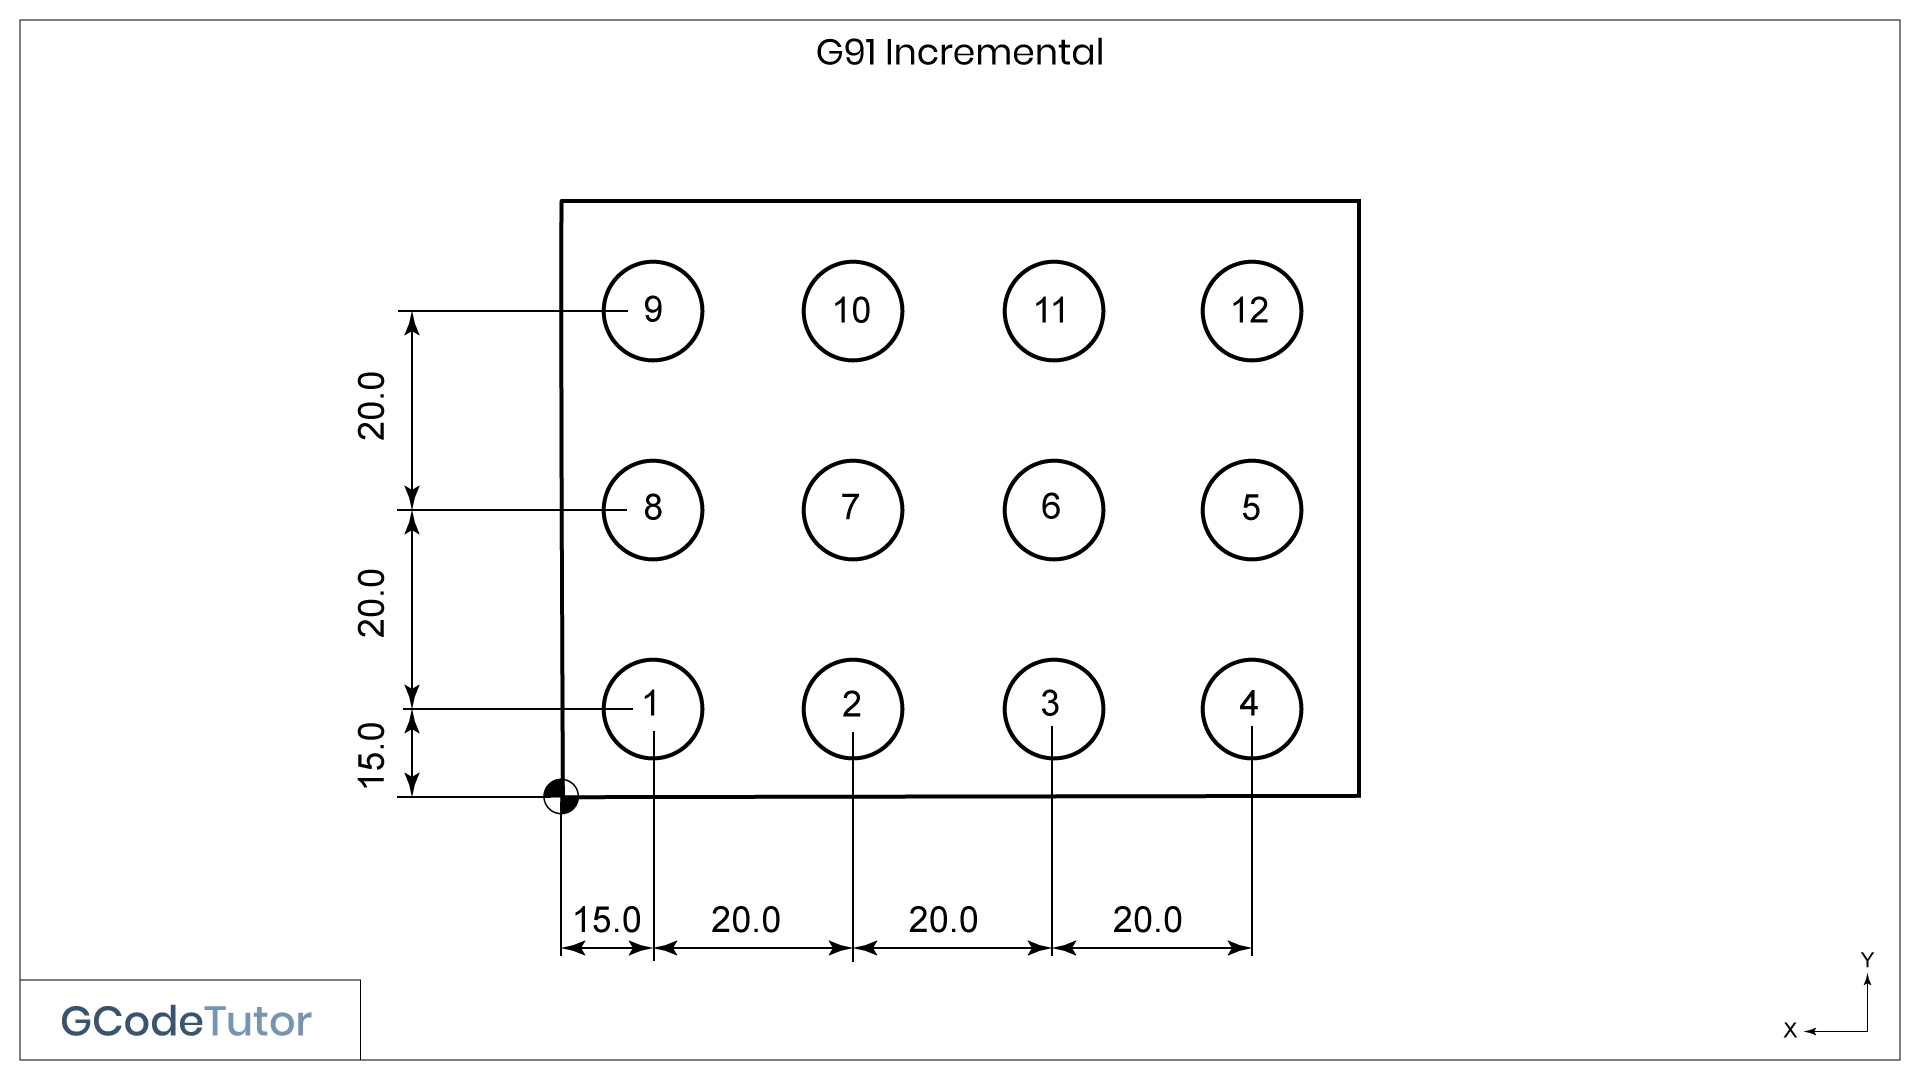 Programming with G91 incremental